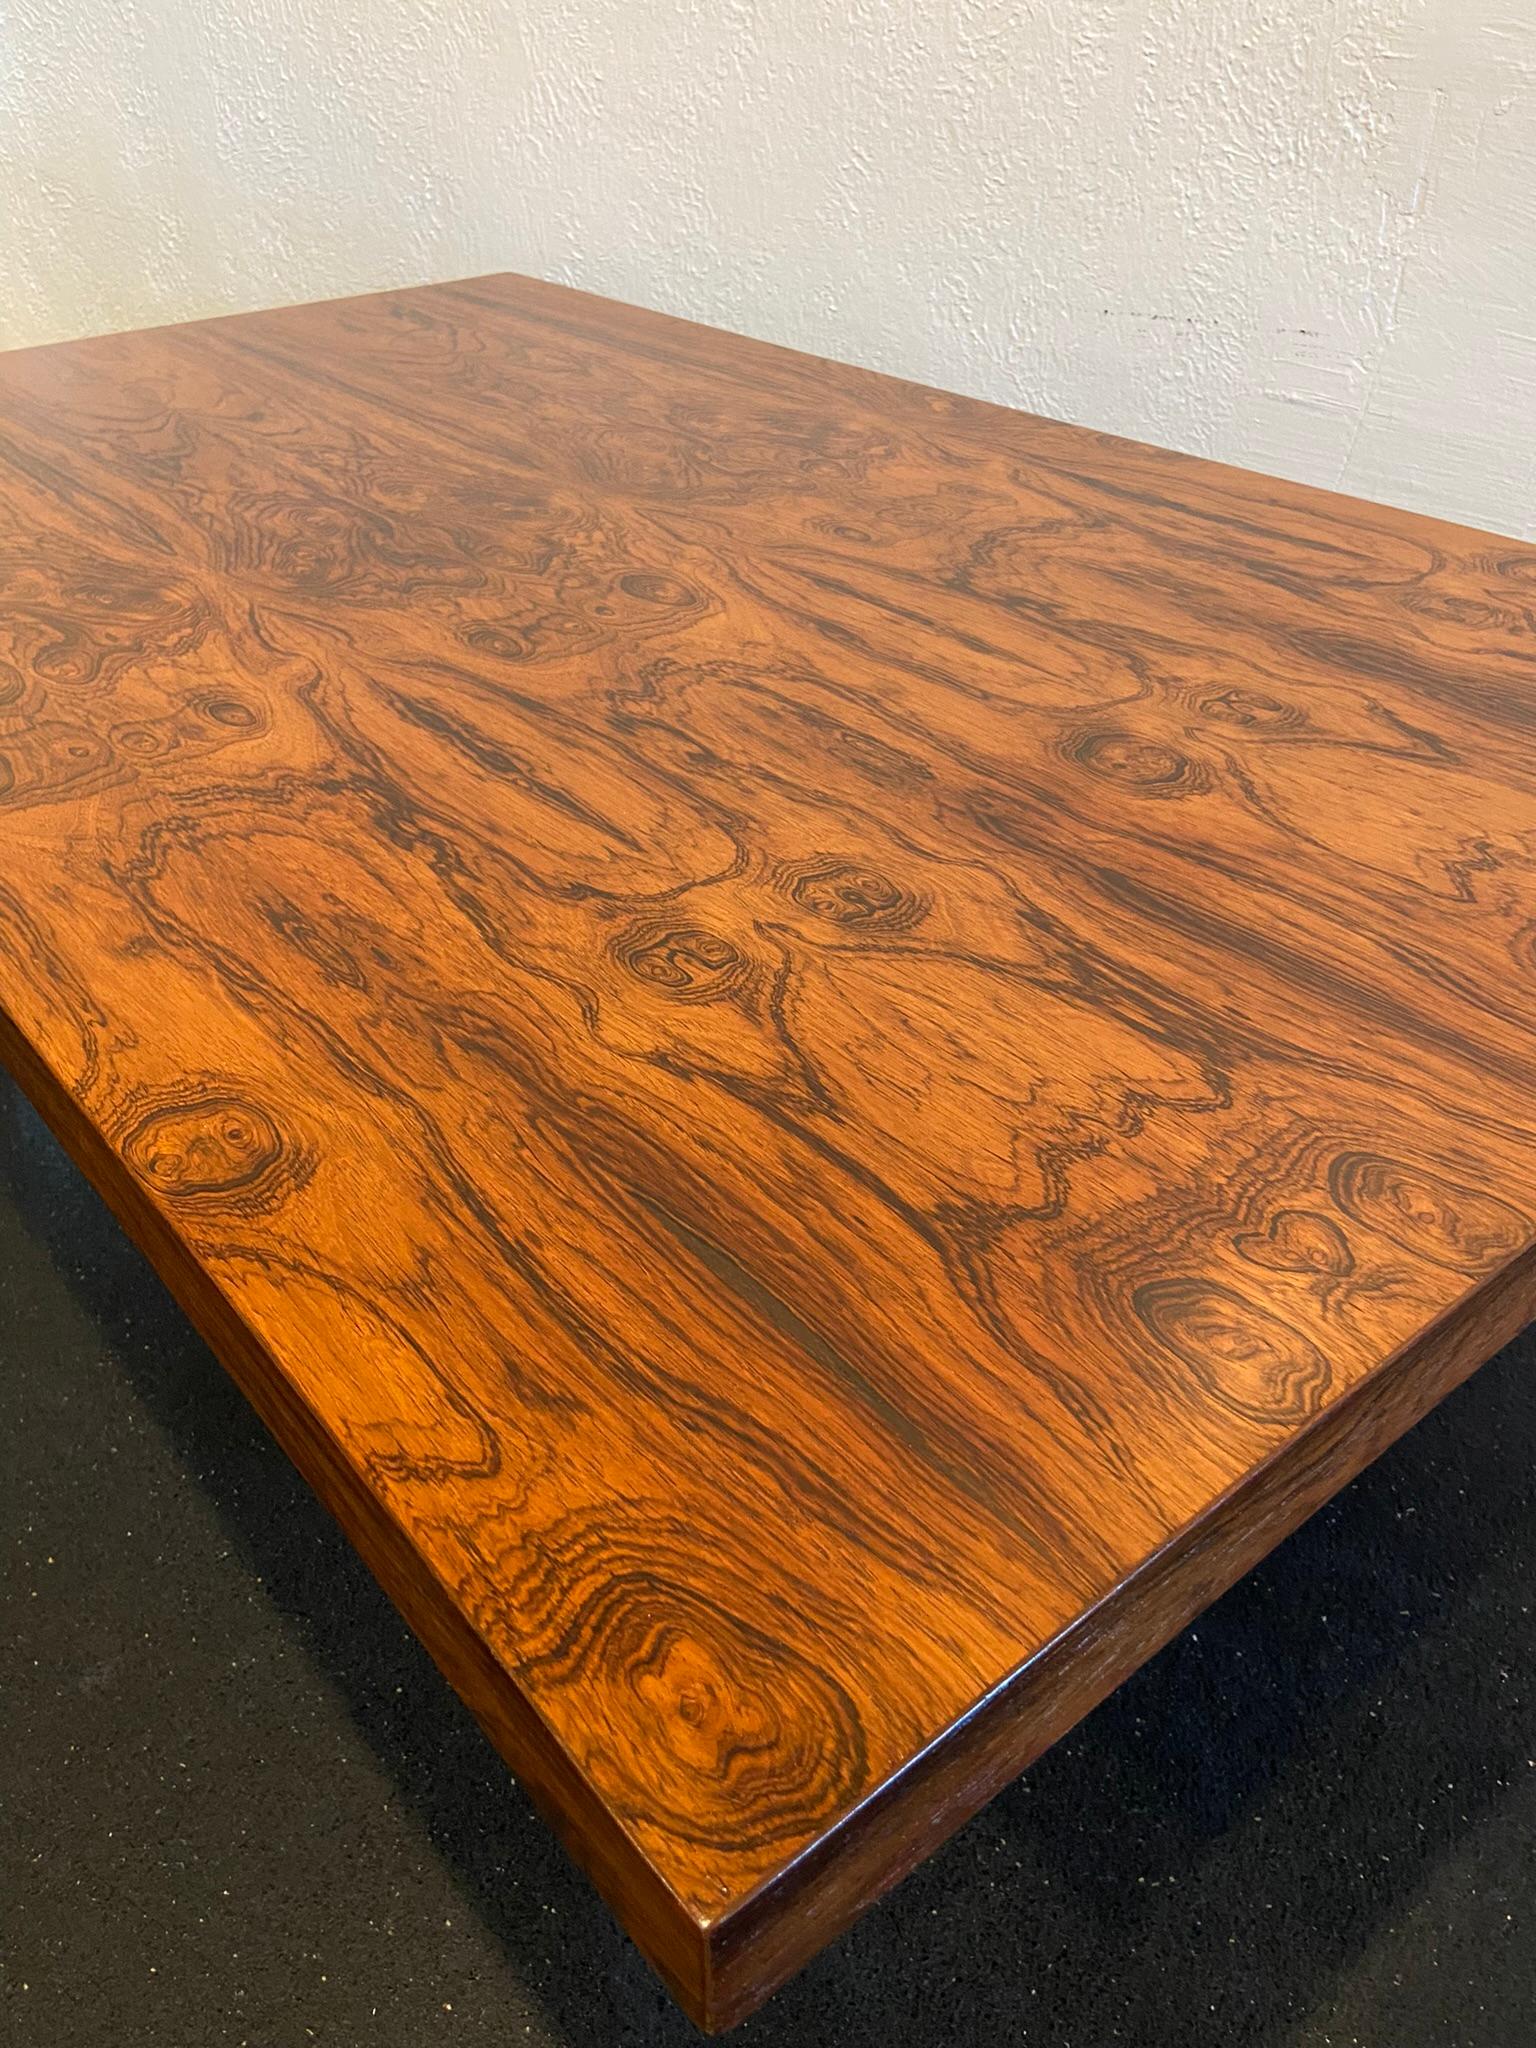 Mid-20th Century Rare Milo Baughman for Thayer Coggin Rosewood Coffee Table For Sale